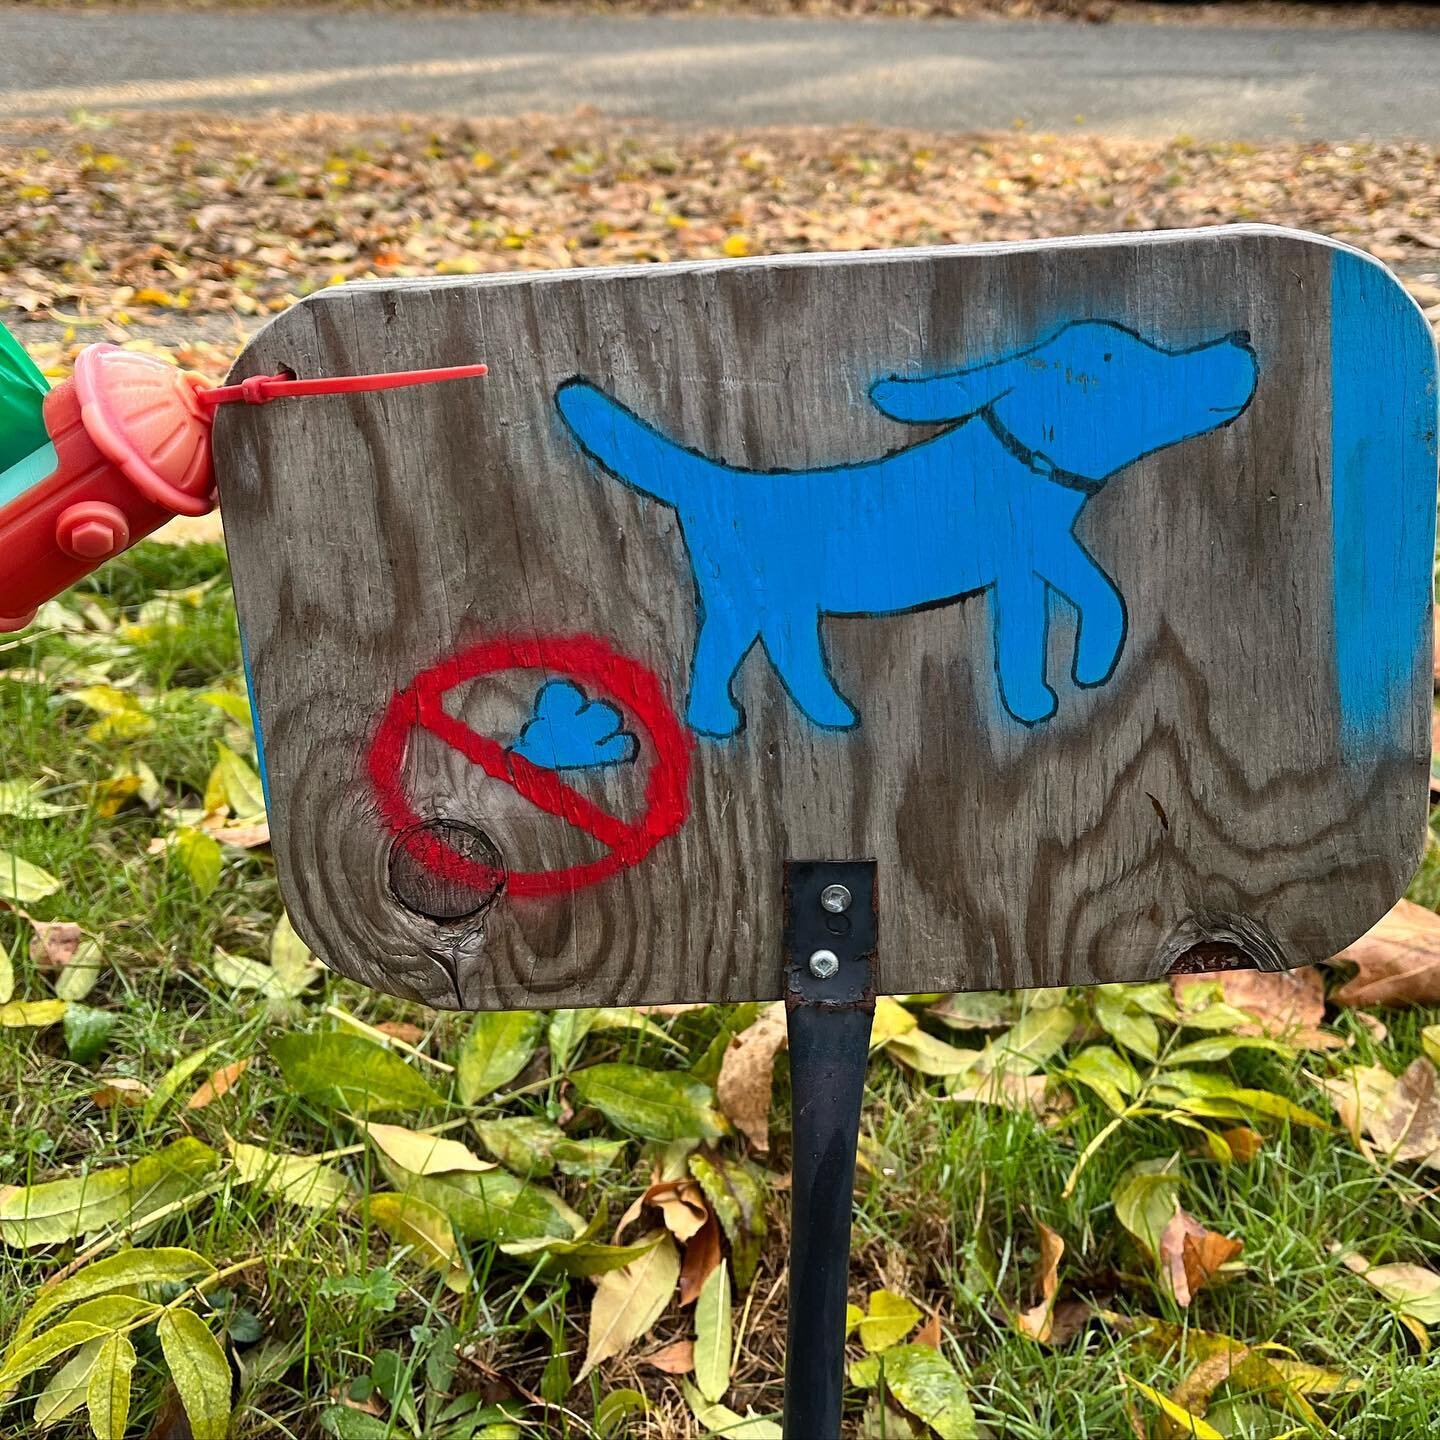 Smurf dog poo not welcome here.